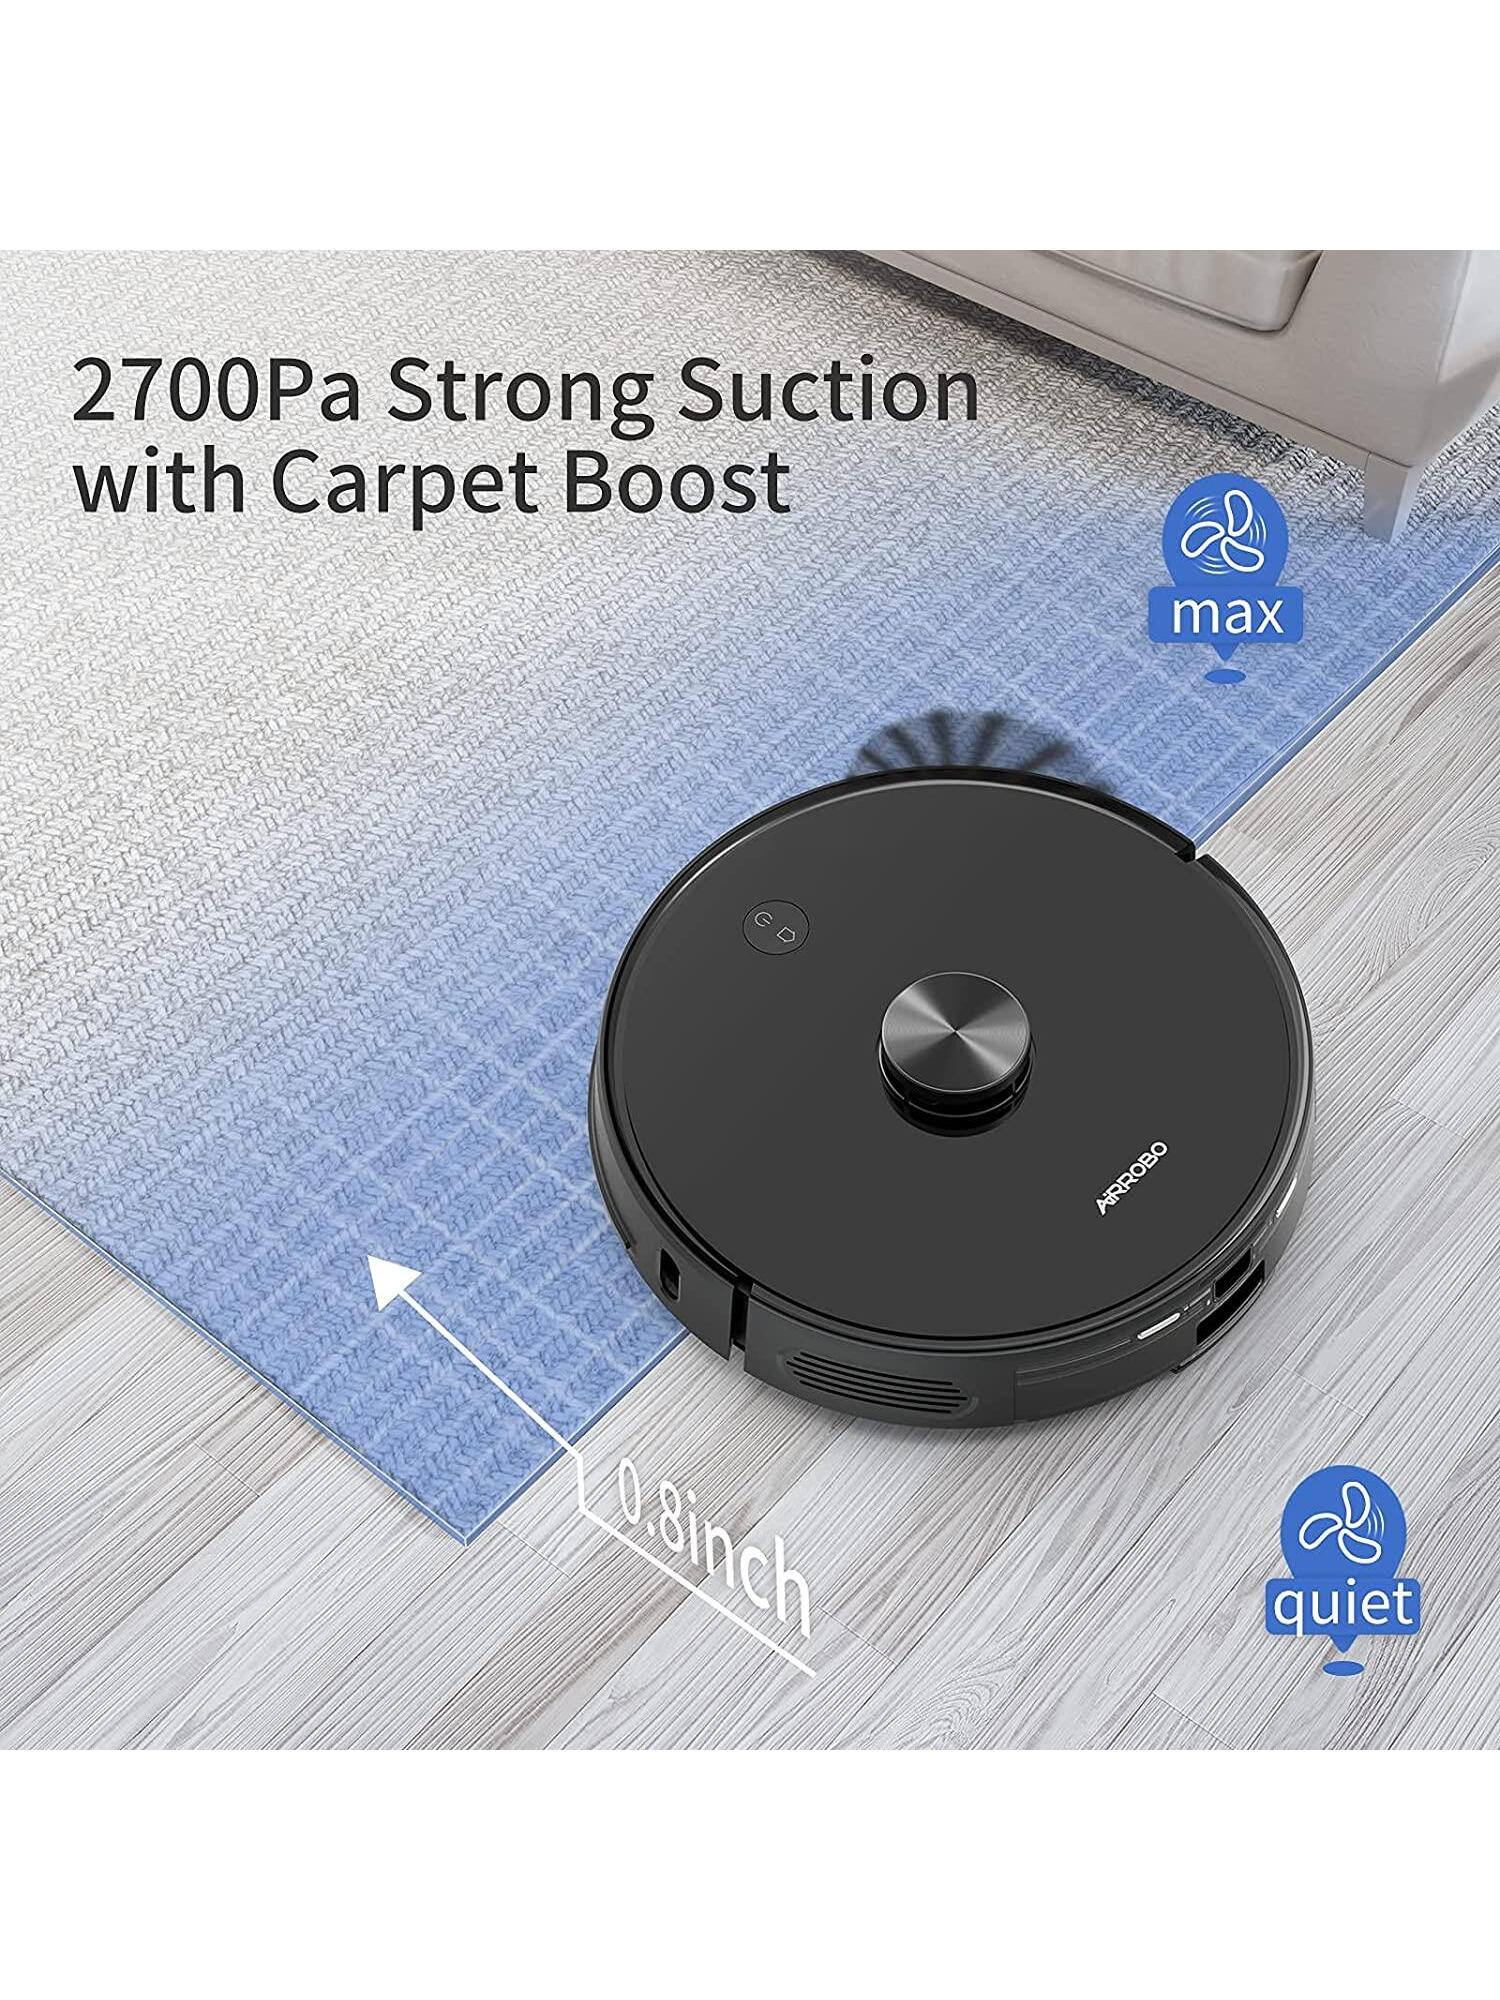 AIRROBO Robot Vacuum with Home Mapping and Mopping, 2700 Pa Max Suction, Wi-Fi enabled, Ideal for Carpets, Hardwood Floors and Pet Owners